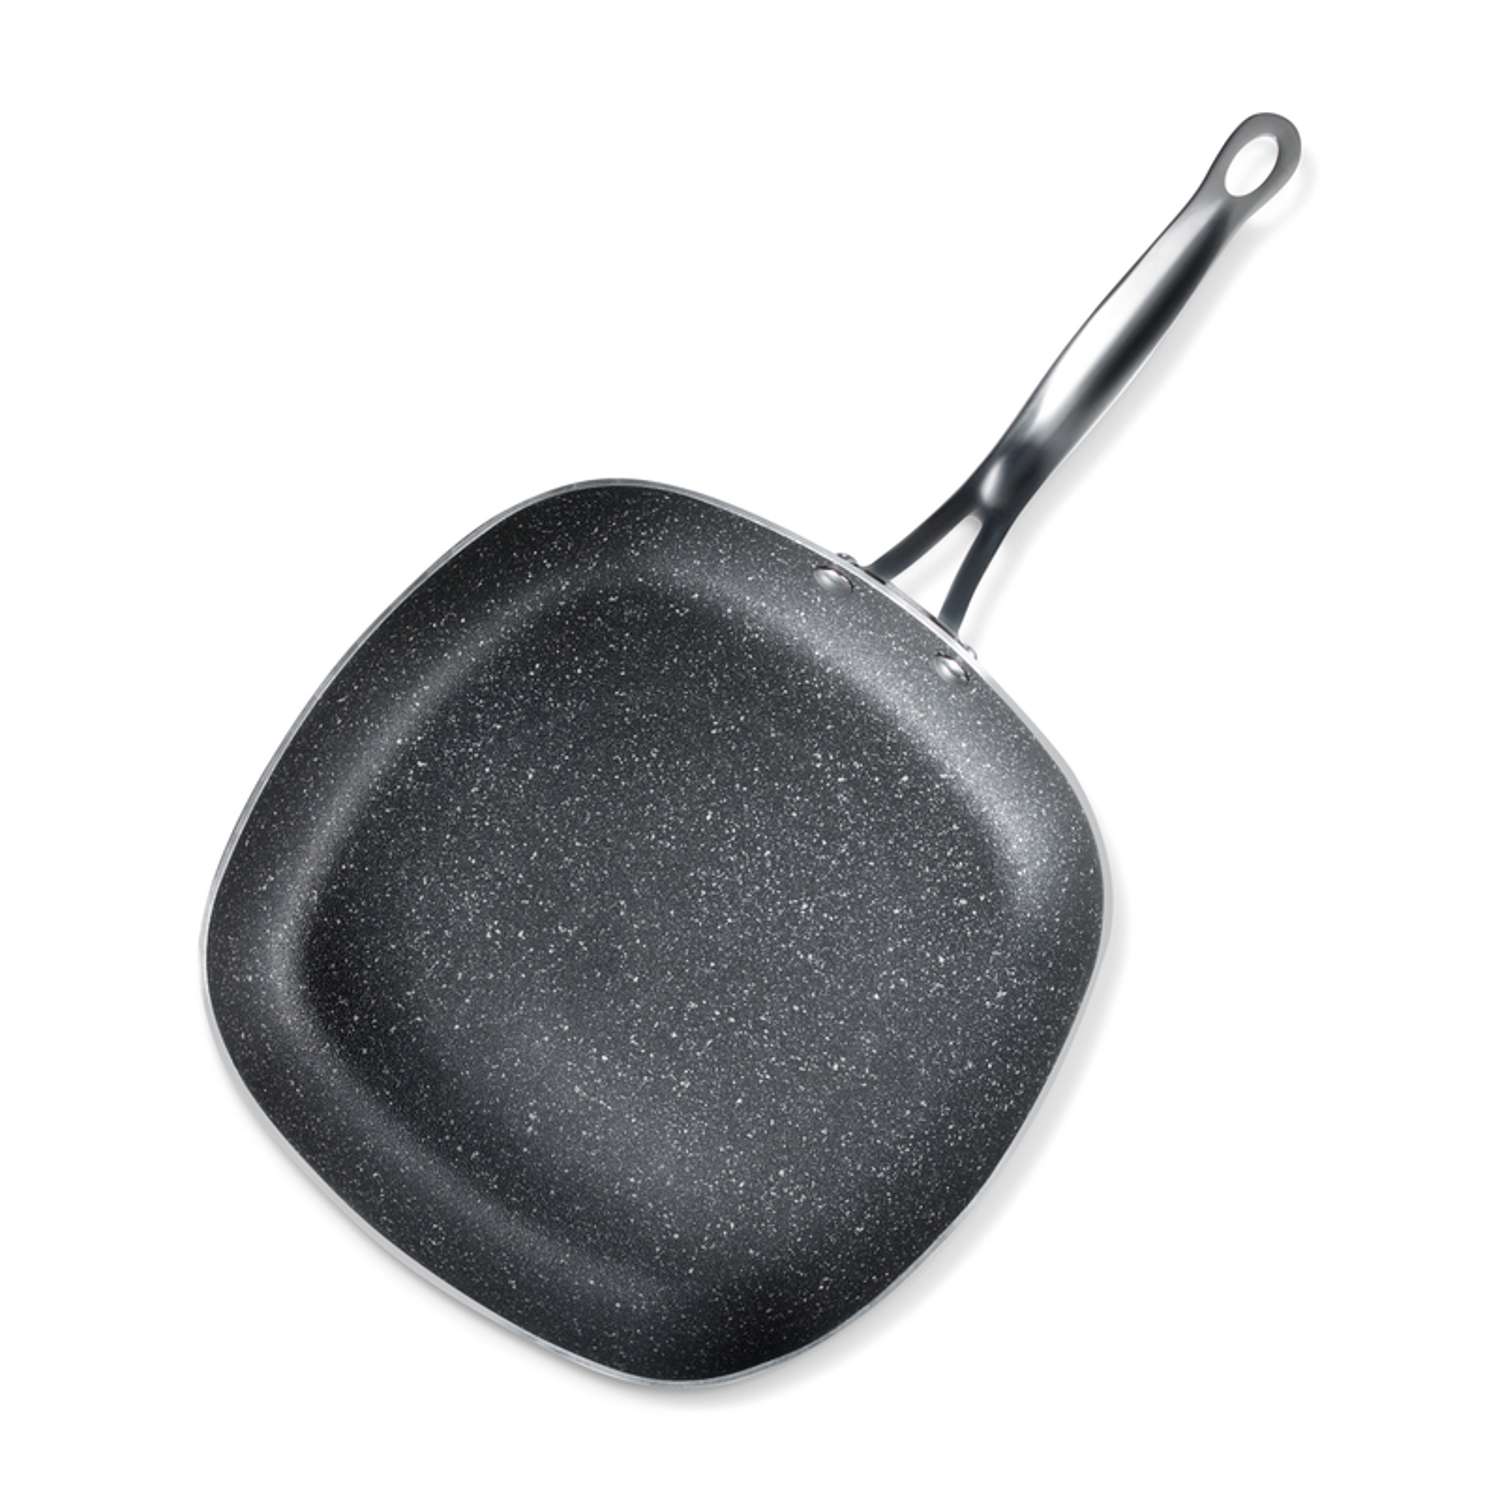 1PC Non-stick Skillet With Removable Handle Medical Stone Saucepan